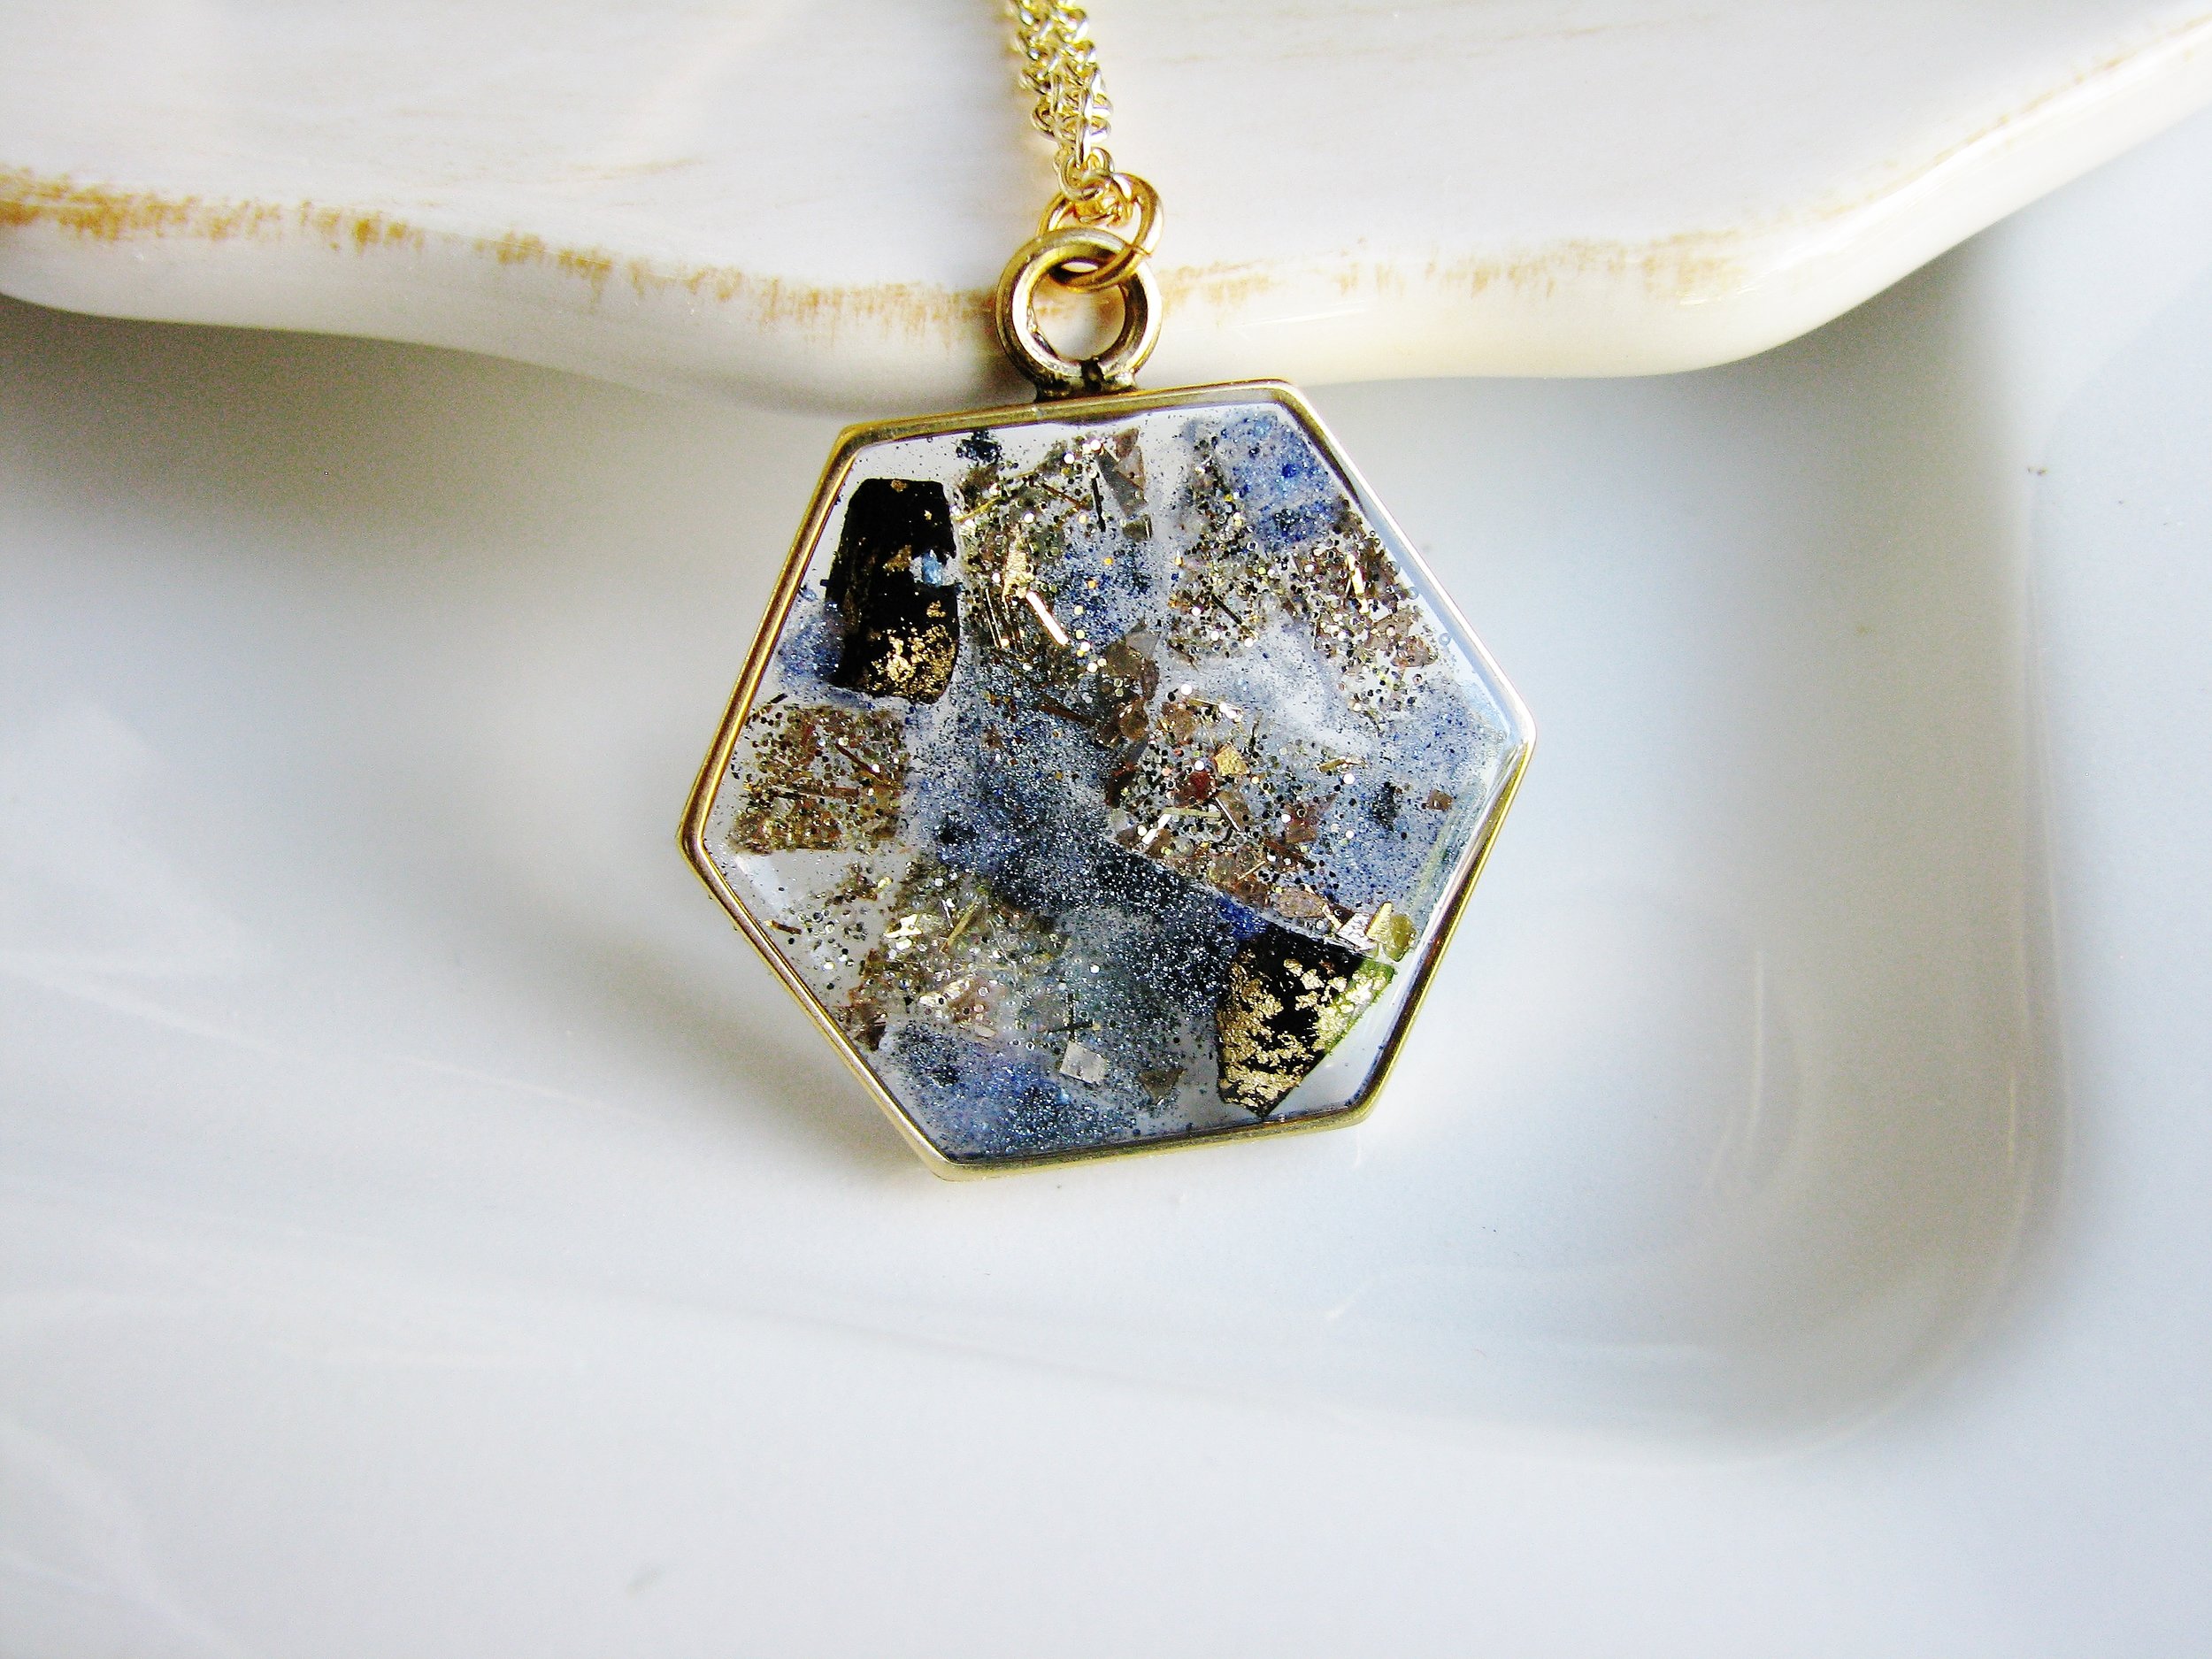 Mica and Glitter Necklace, Faux Geology Jewelry KateeMarie